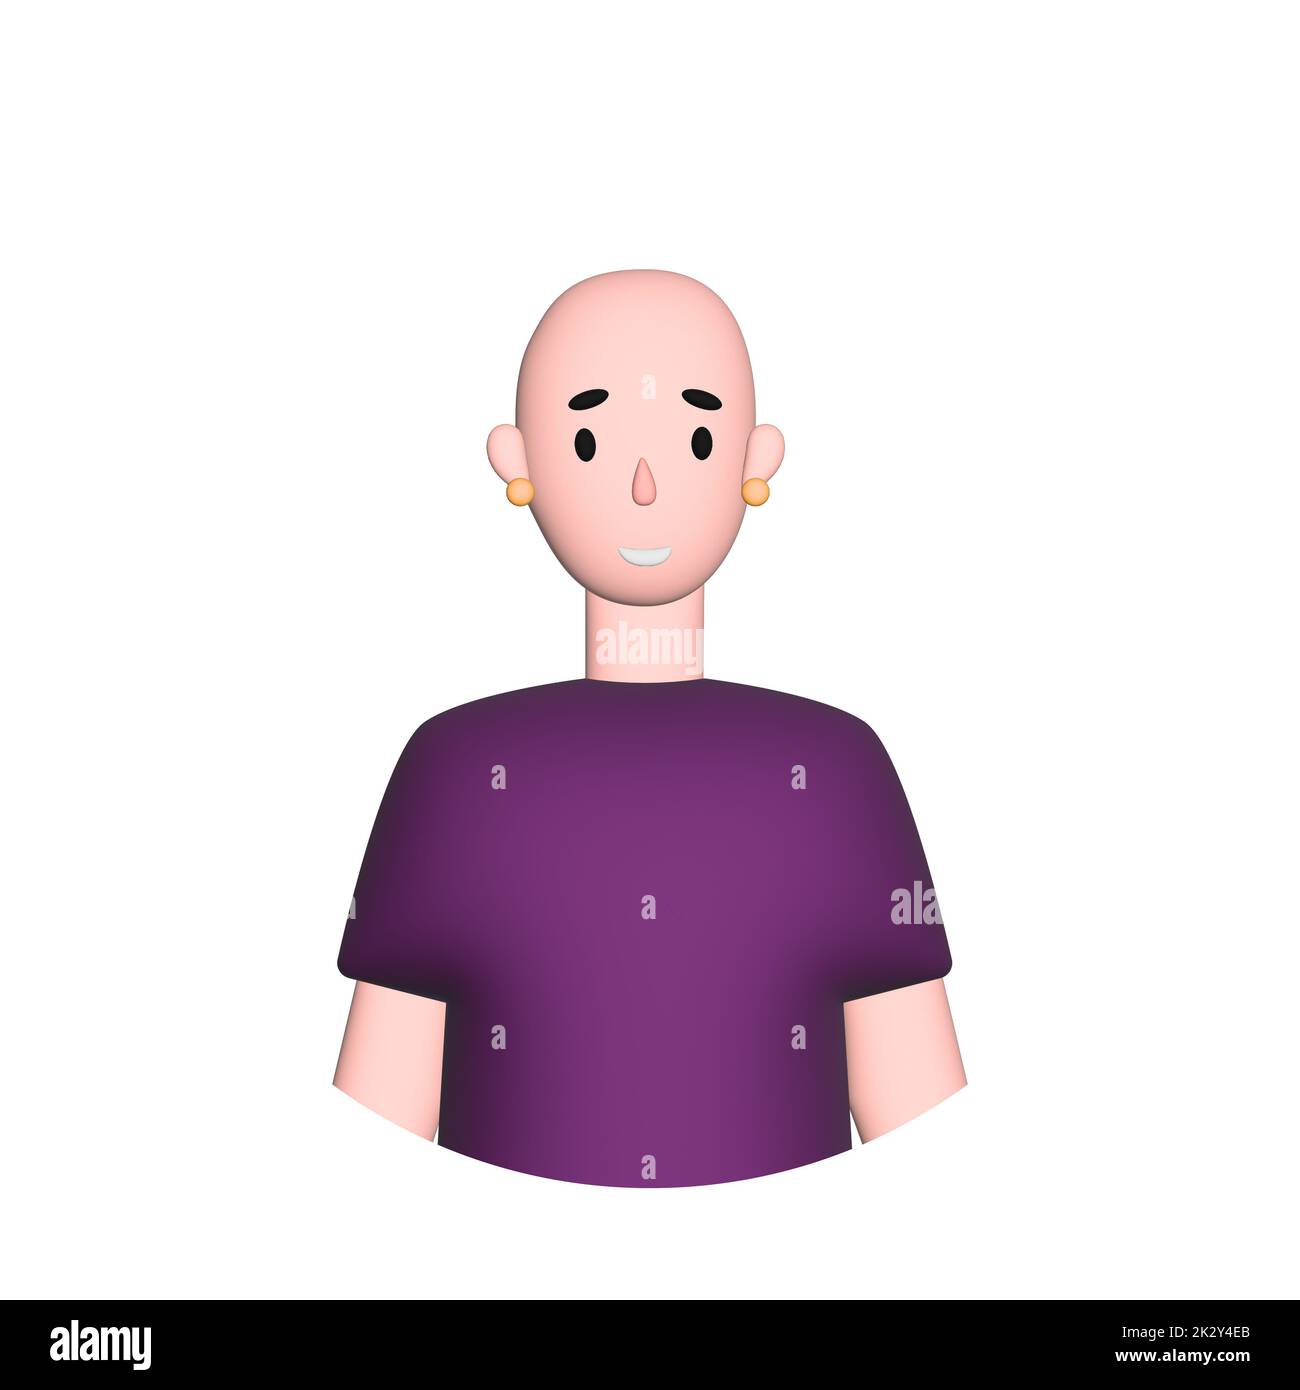 Download Funny Bald Roblox Pictures